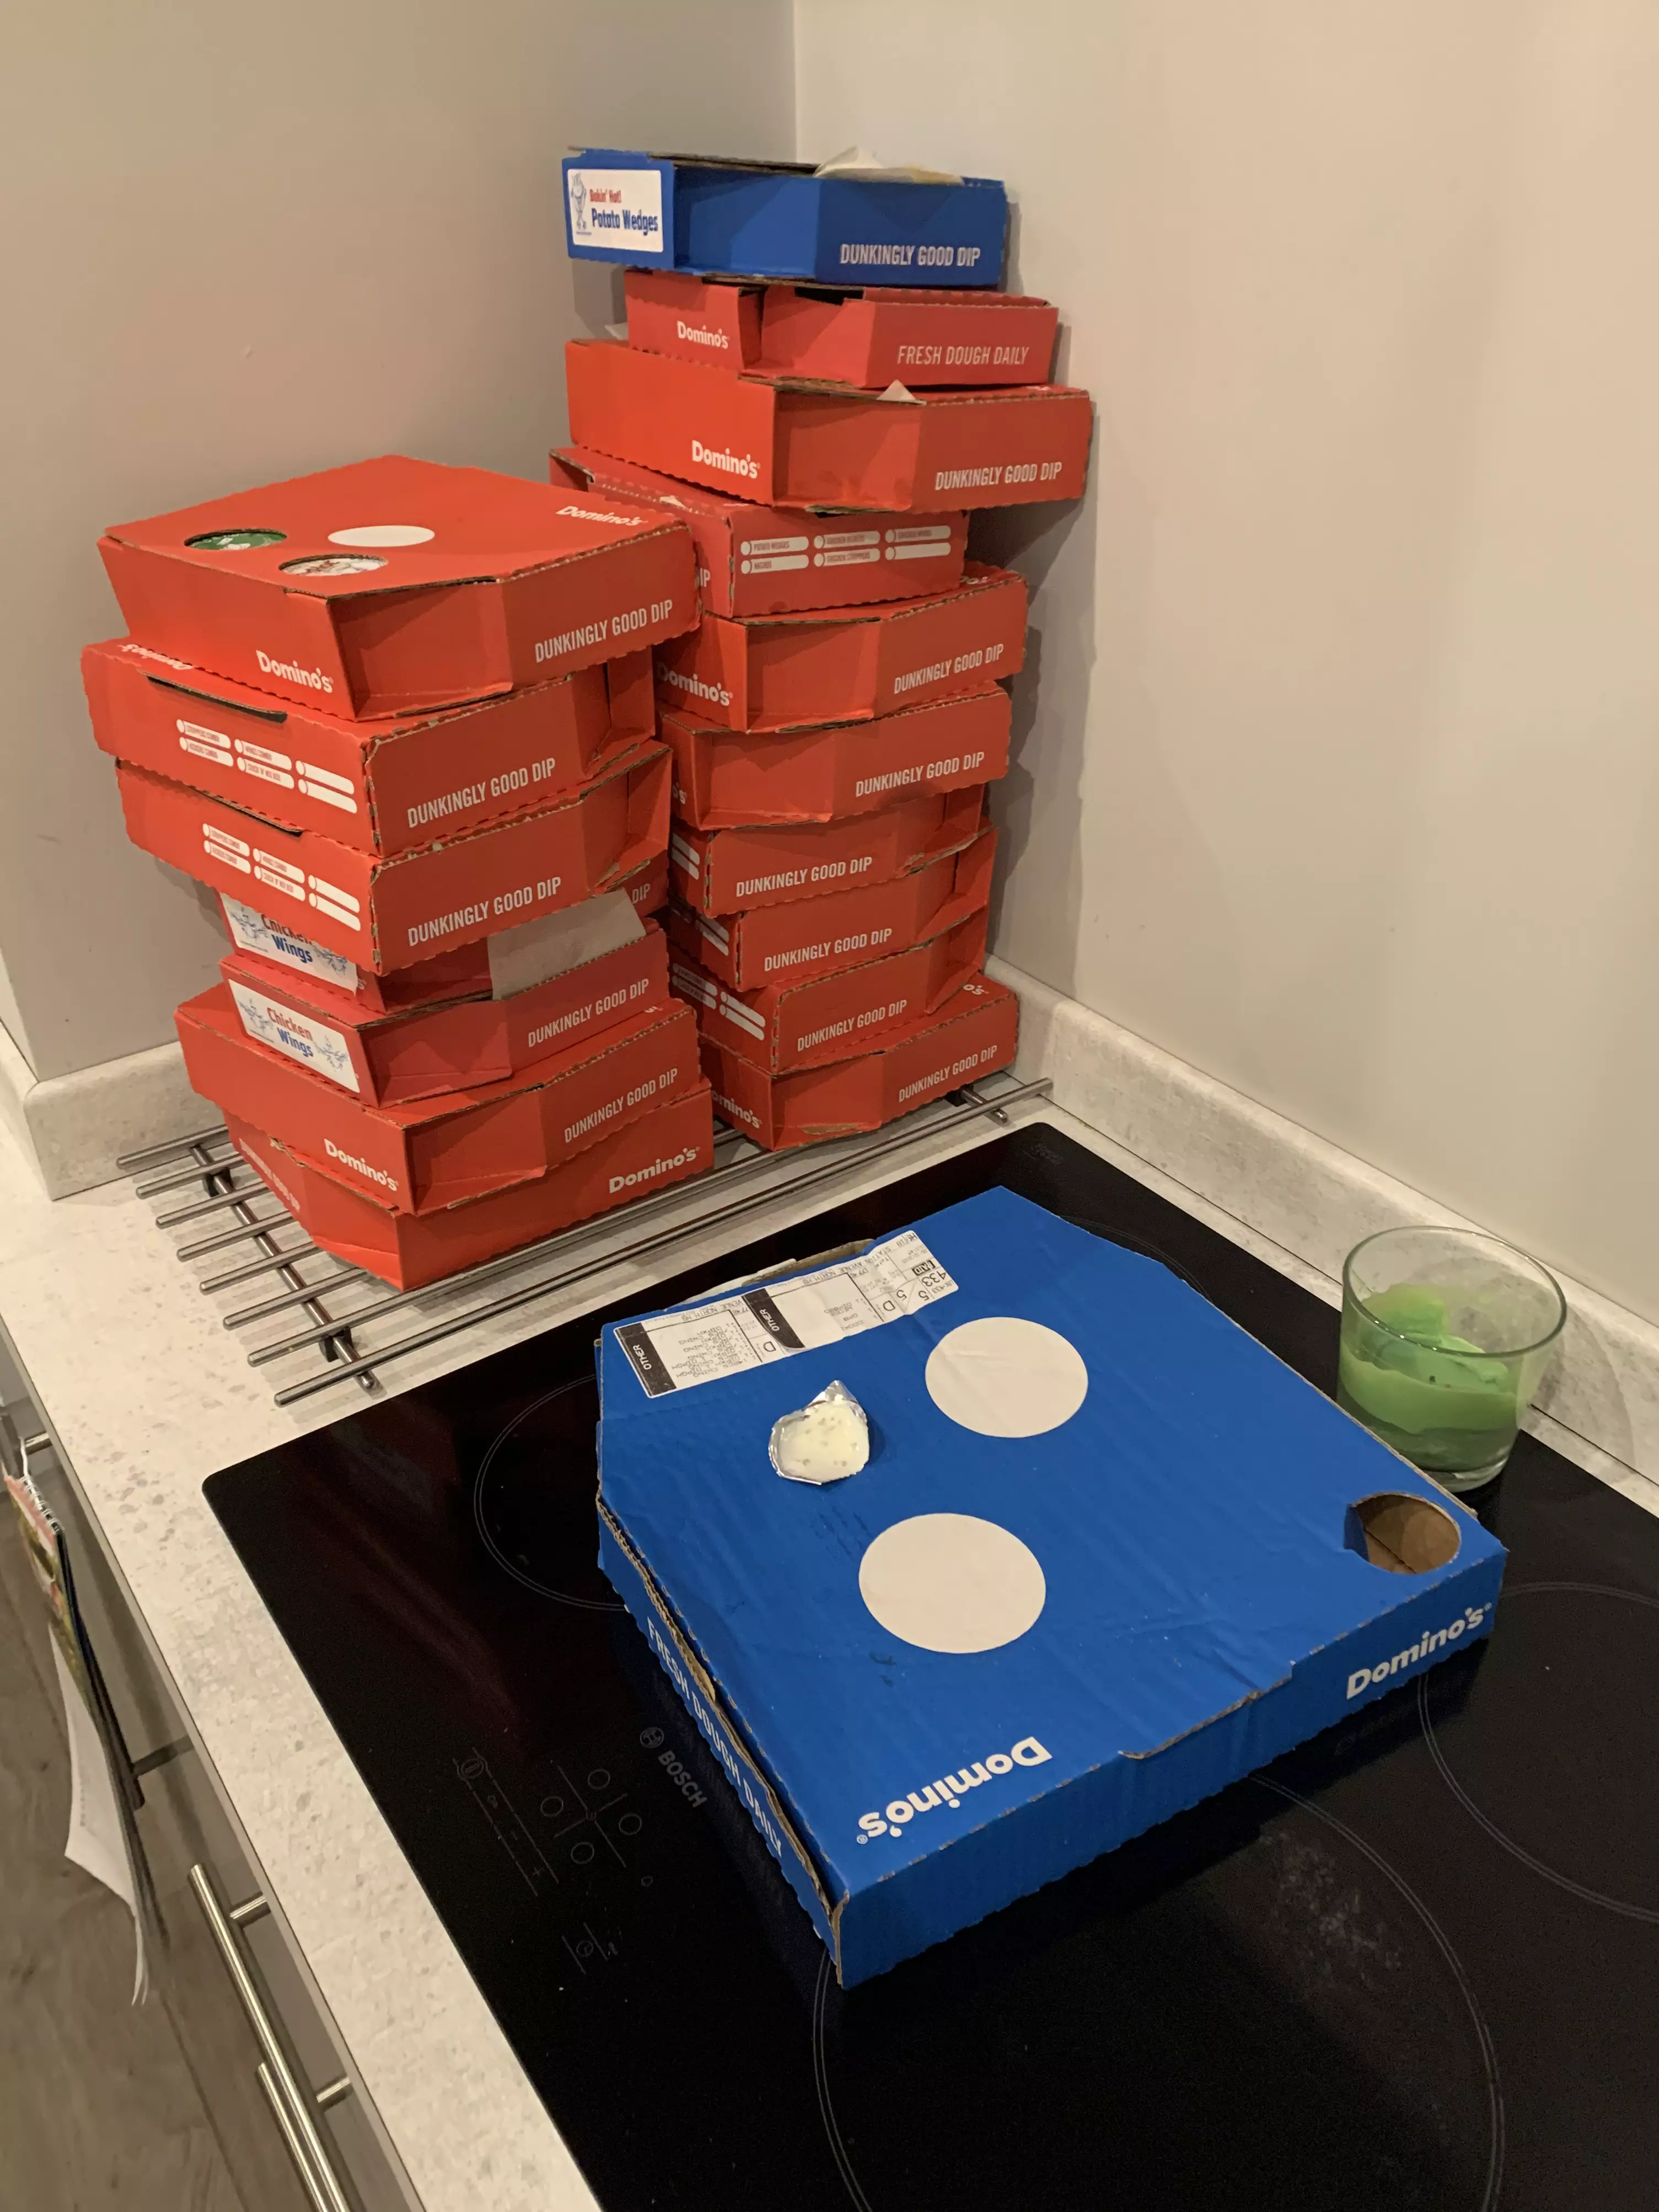 The Domino's order.